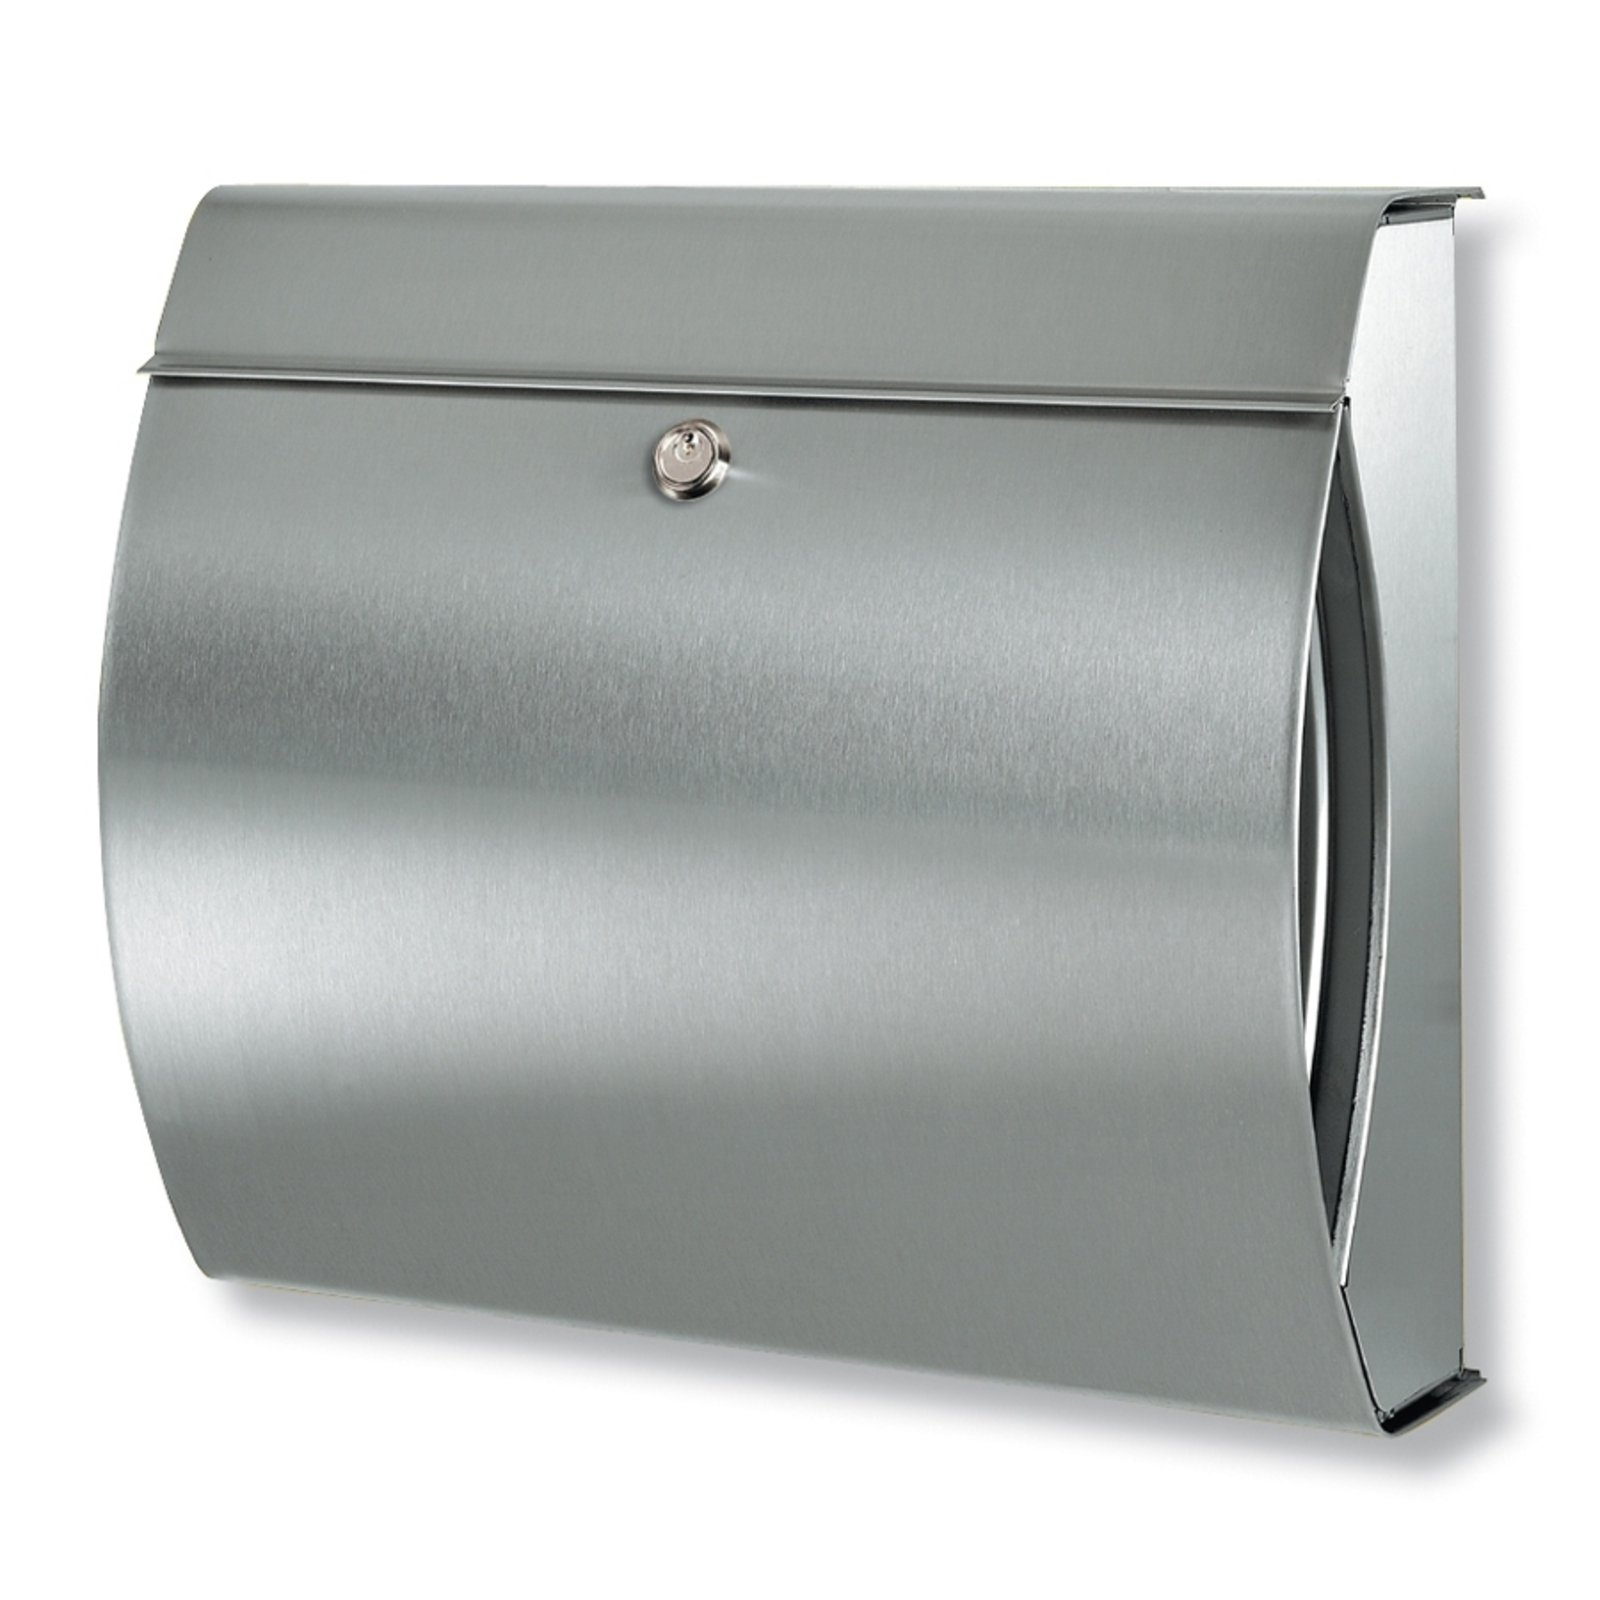 Fashionable stainless steel letter box Verona